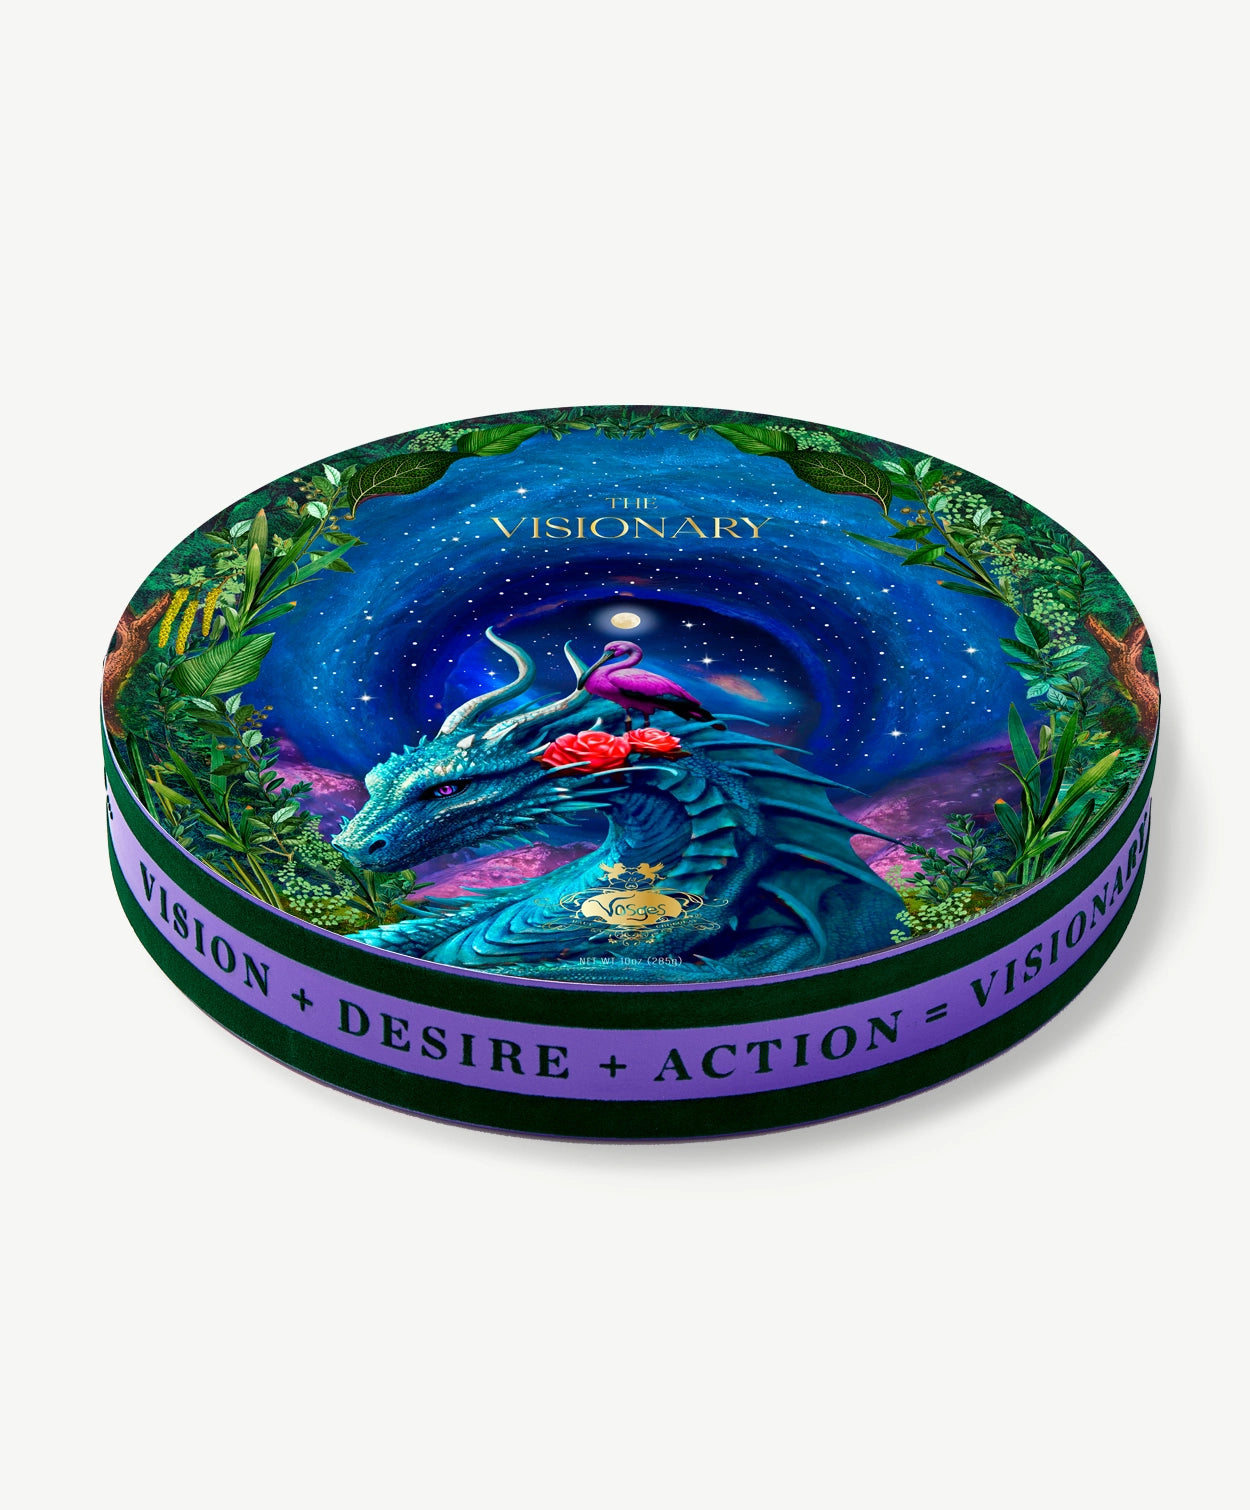 A circular Vosges chocolate collection box trimmed in purple velvet, decorated with a blue dragon and pink egret in a green forest in front a dark nighttime sky, on a light grey background. 